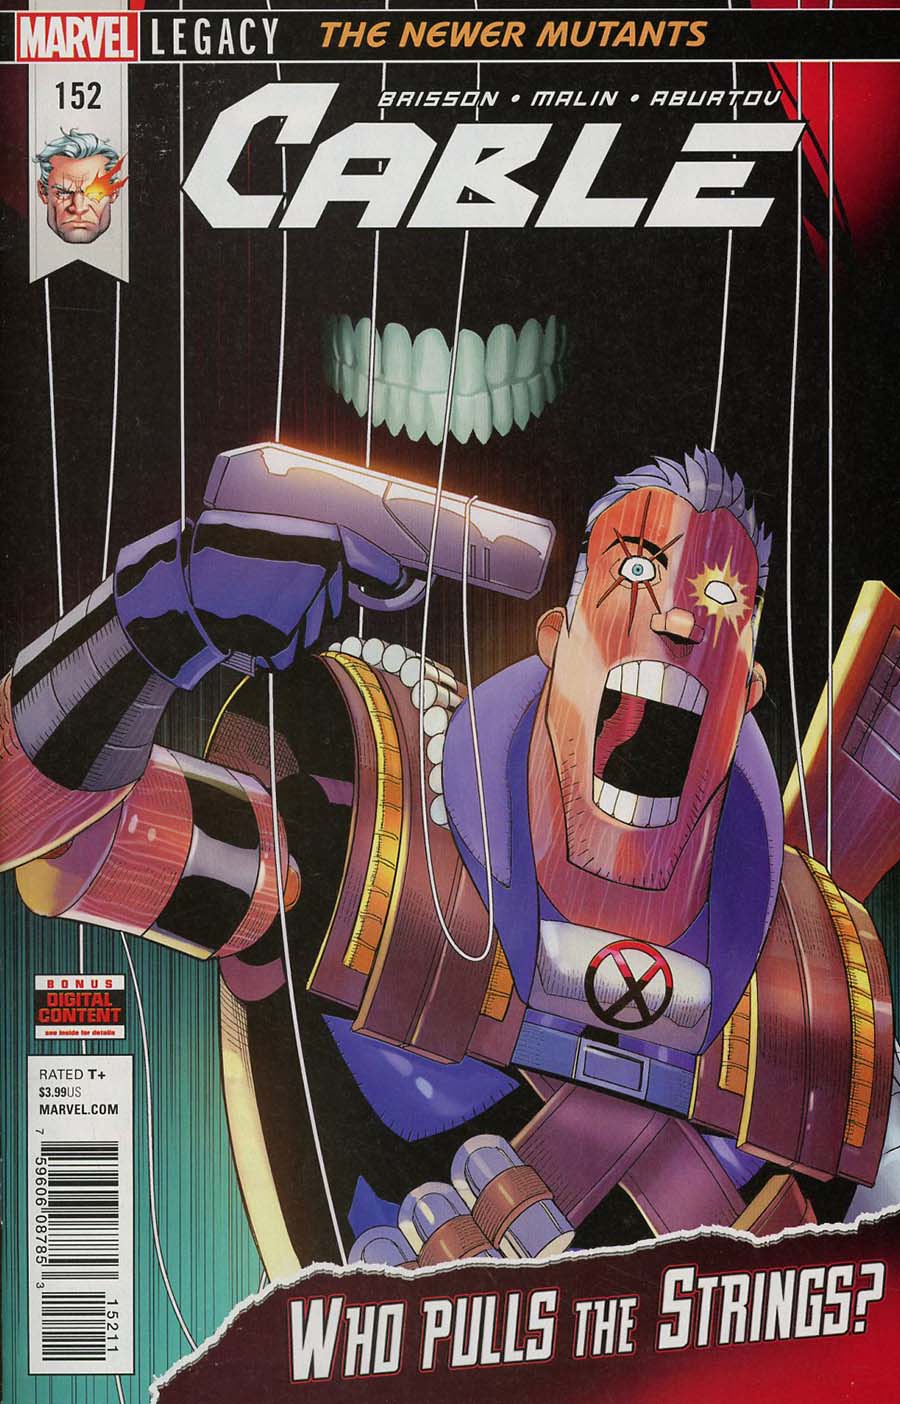 Cable Vol 3 #152 (Marvel Legacy Tie-In)